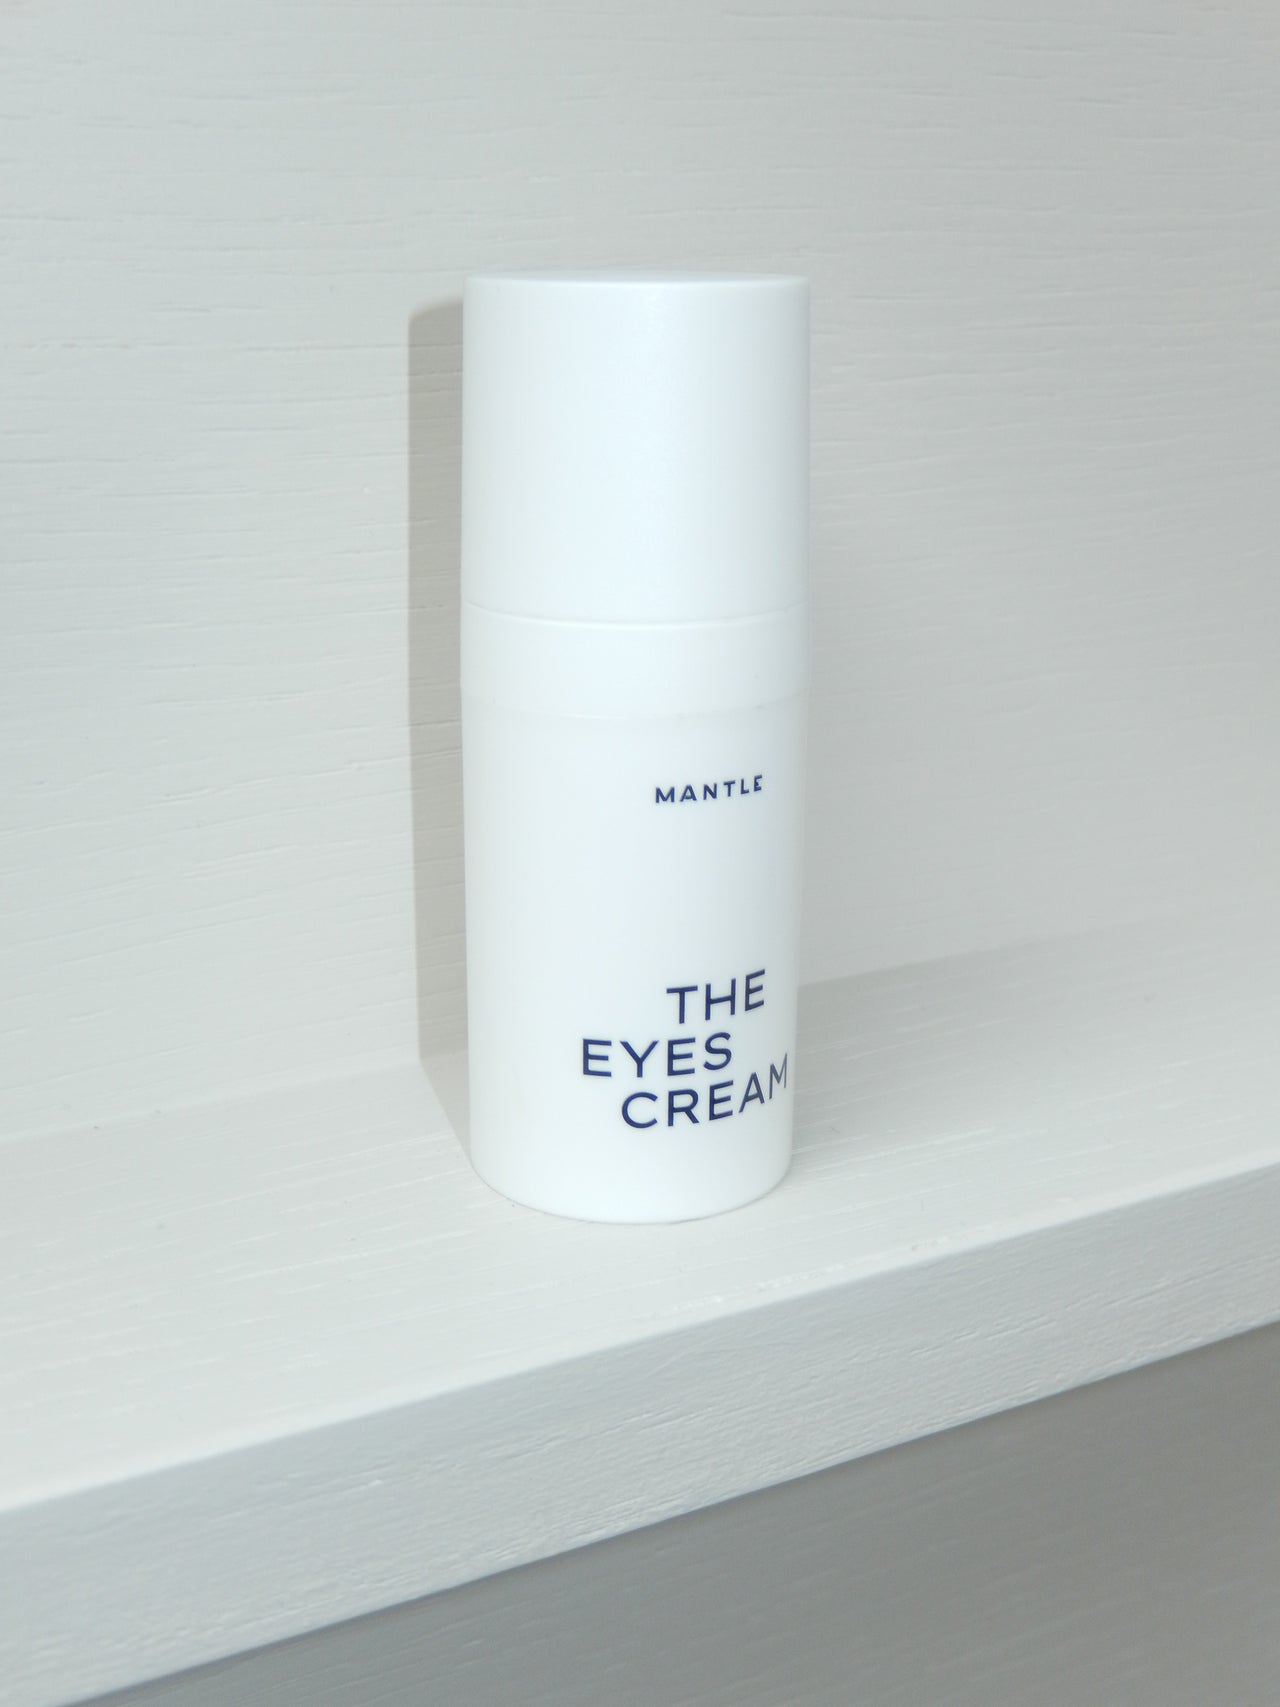 The Eye Cream by Mantle